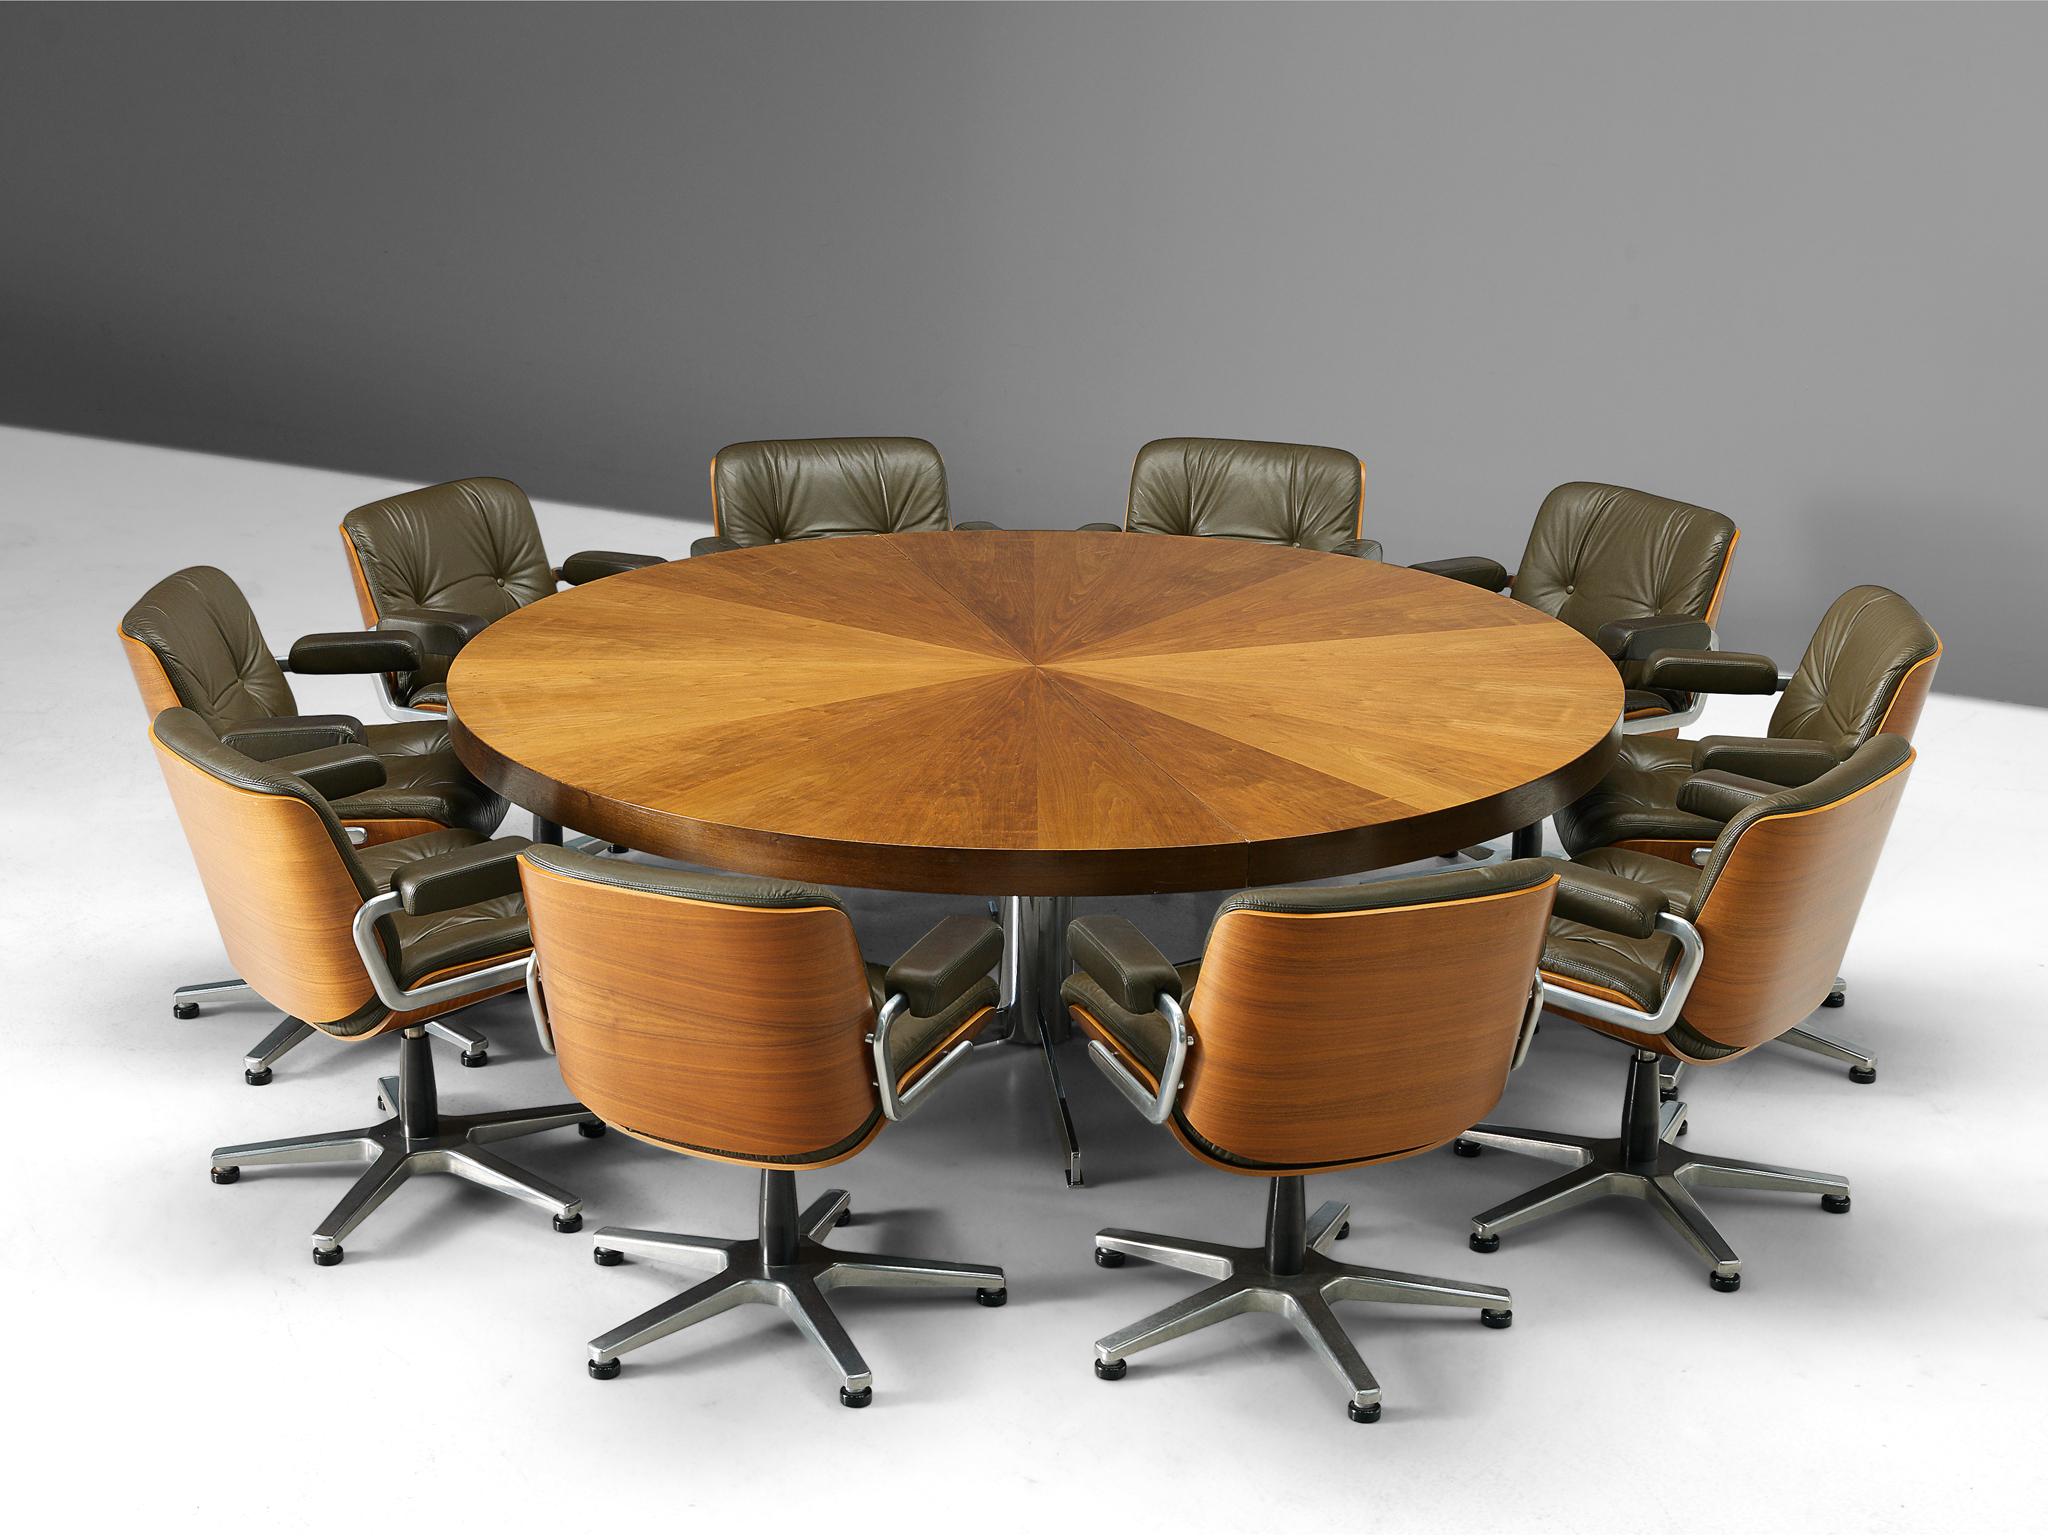 Conference table and ten swivel chairs, Italian design, walnut and metal, 1970s. 

A large round conference table accompanied by a set of ten swivel chairs. The table as well as the chairs are executed in walnut. The tabletop shows a beautiful